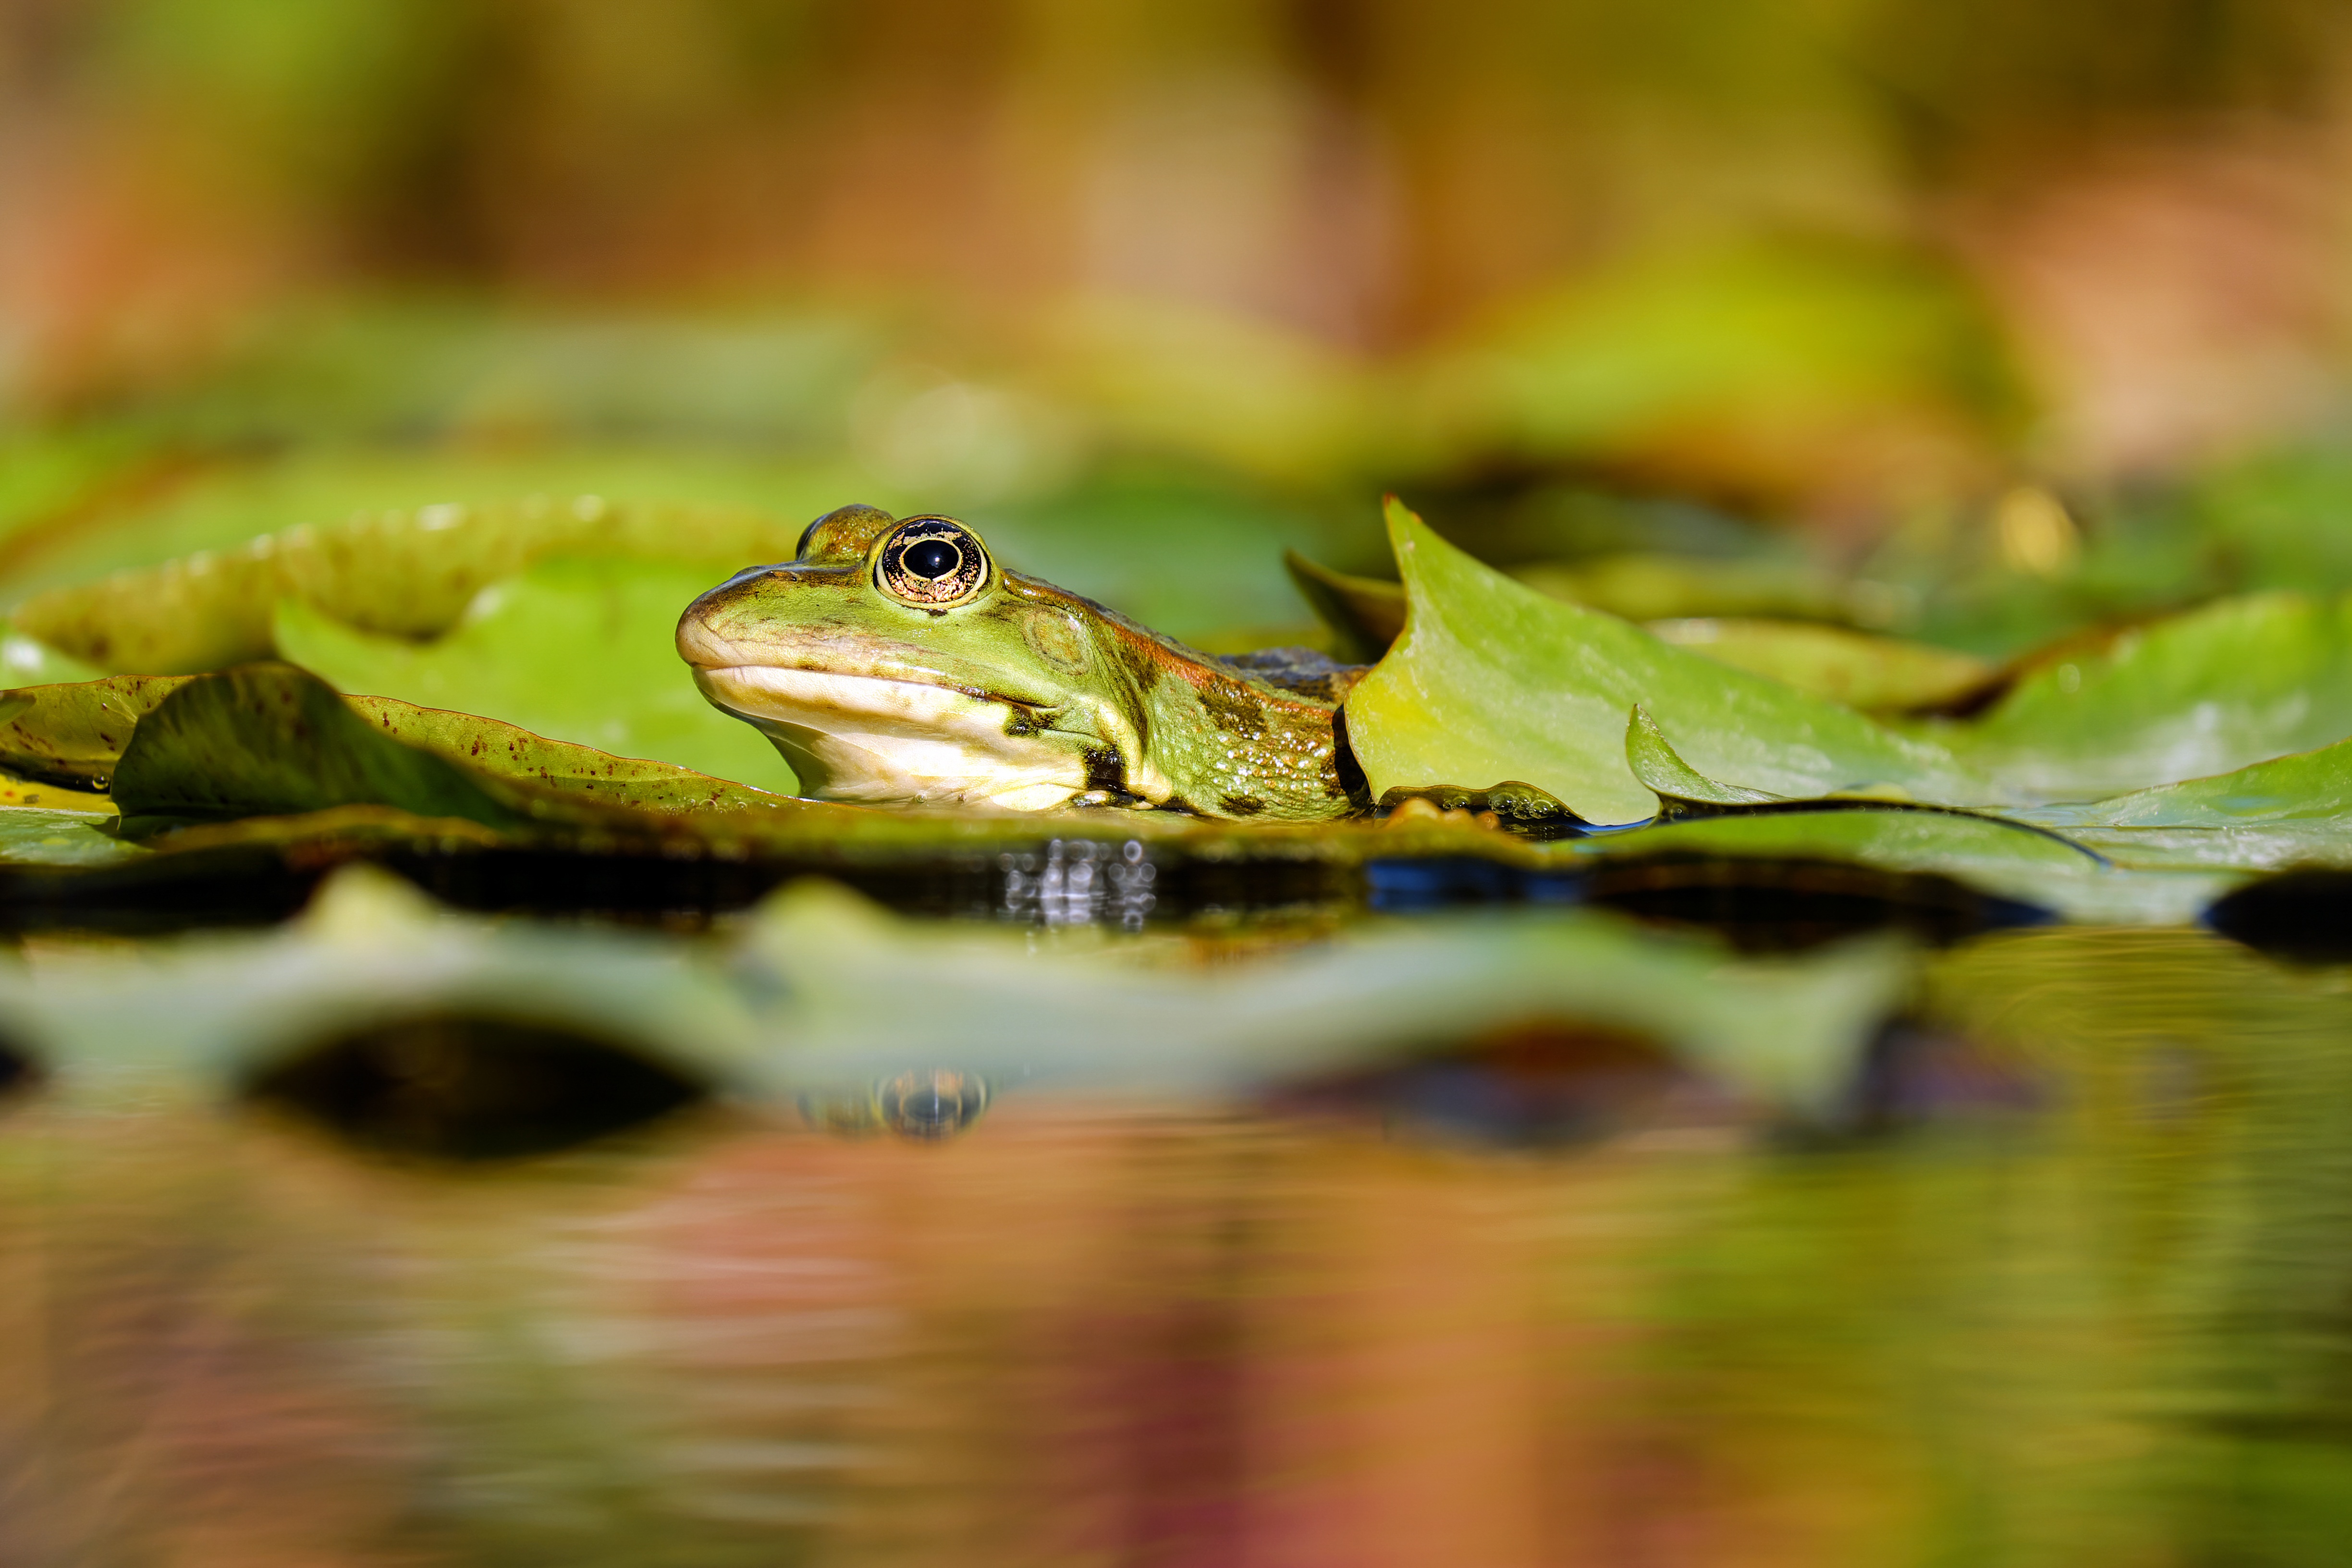 Frog Sitting on Lily Pads by Couleur